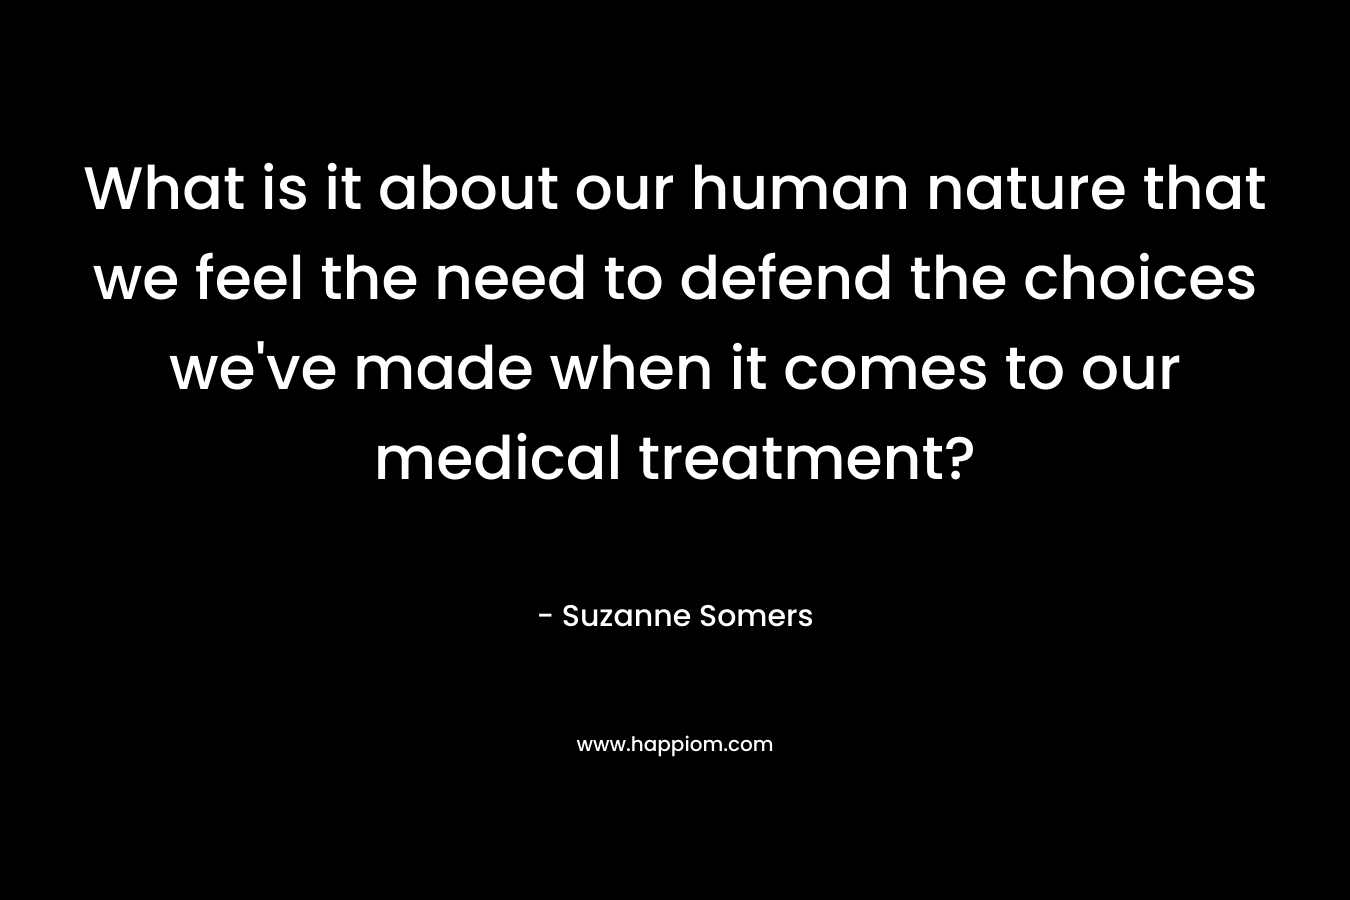 What is it about our human nature that we feel the need to defend the choices we've made when it comes to our medical treatment?